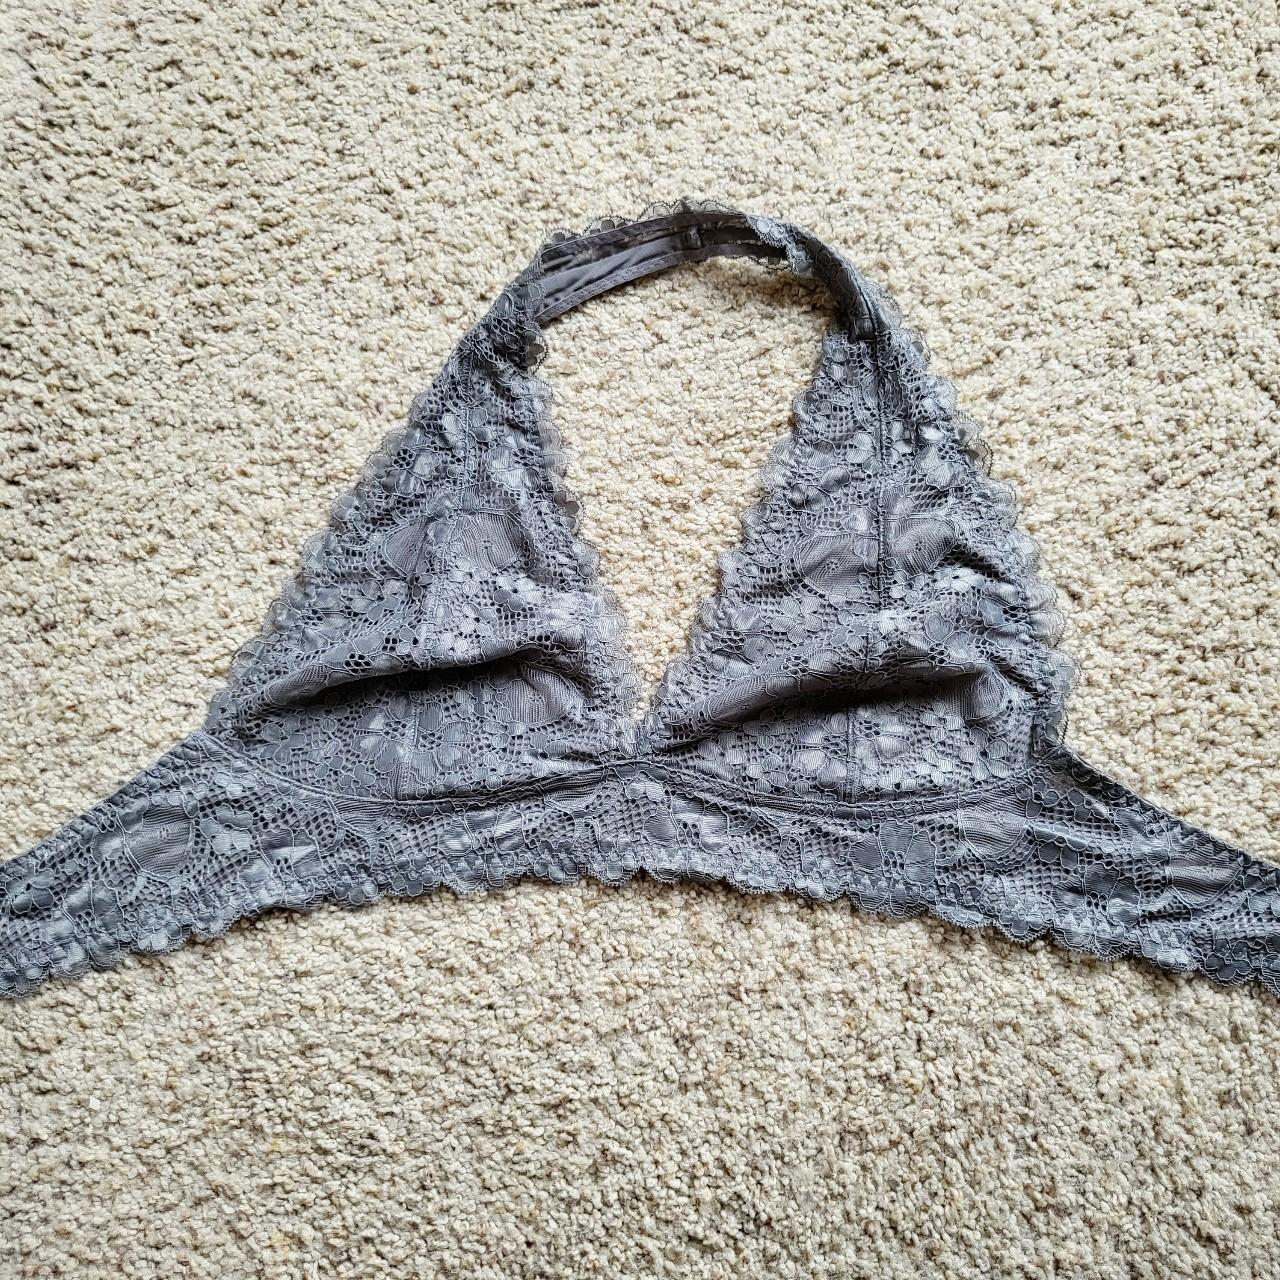 Cute grey lace padded halter bralette from - Depop